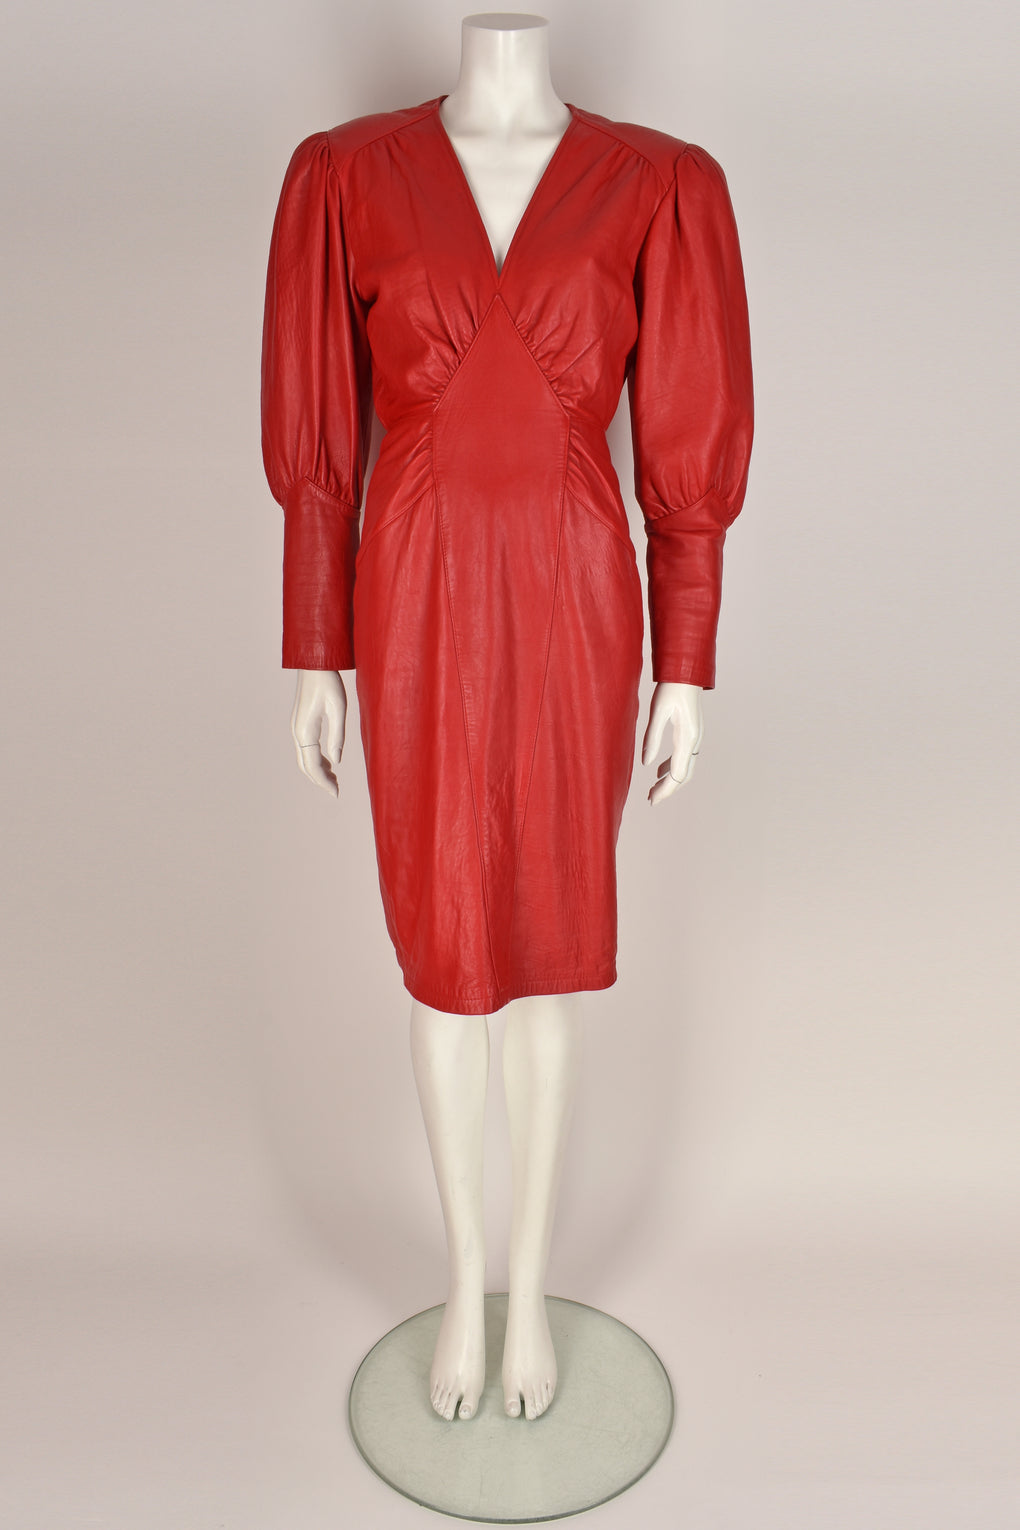 MICHAEL HOBAN 80s red leather dress S